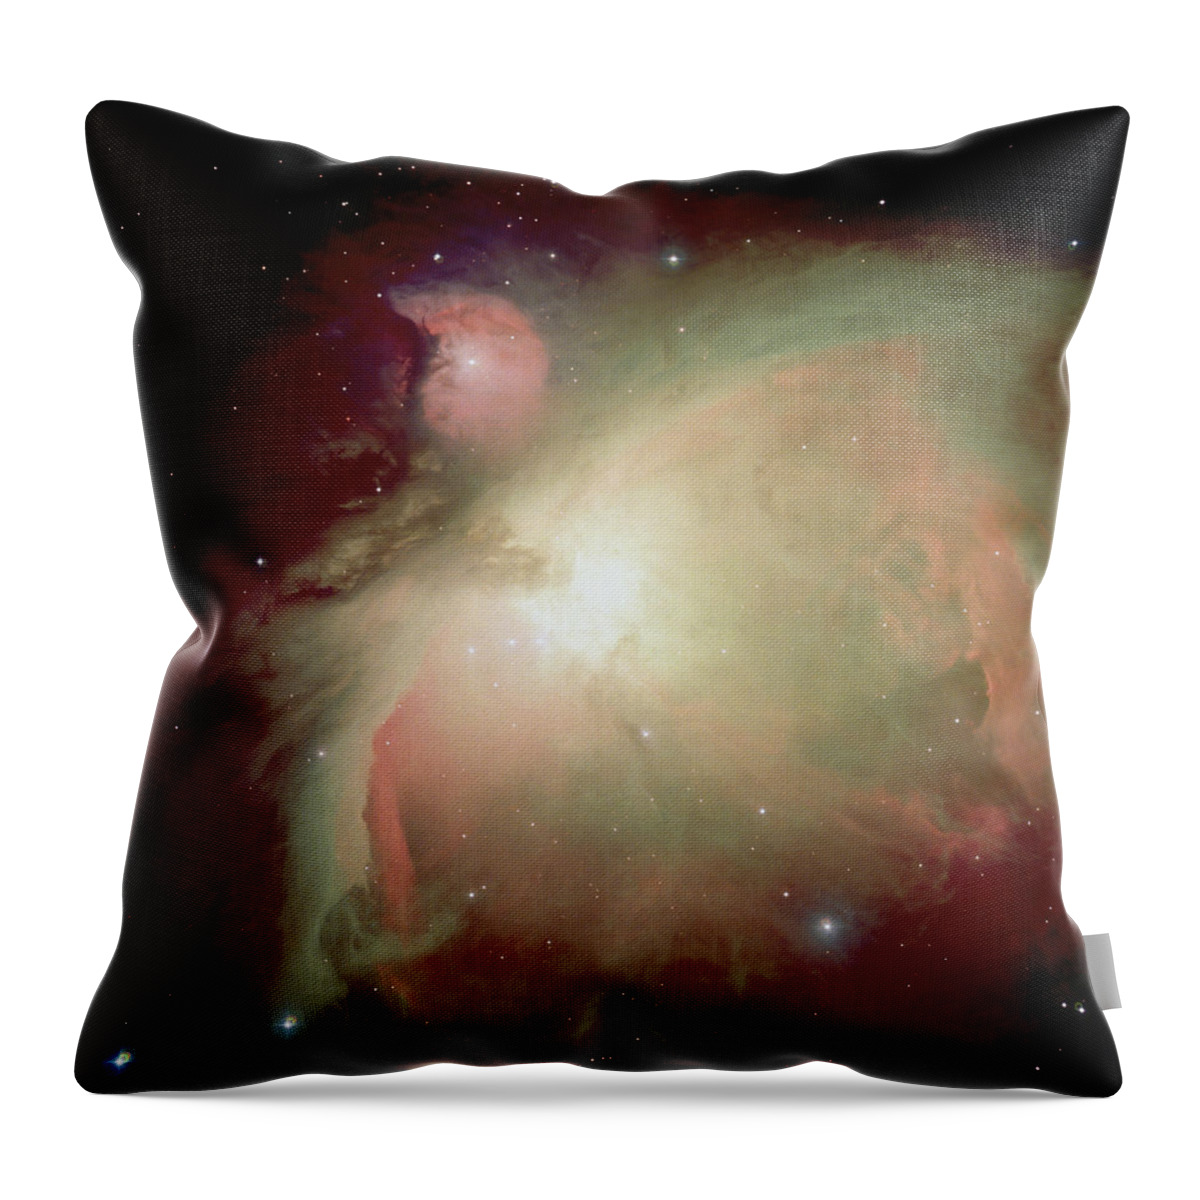 Outdoors Throw Pillow featuring the photograph Orion Nebula, View From Satellite by Stocktrek